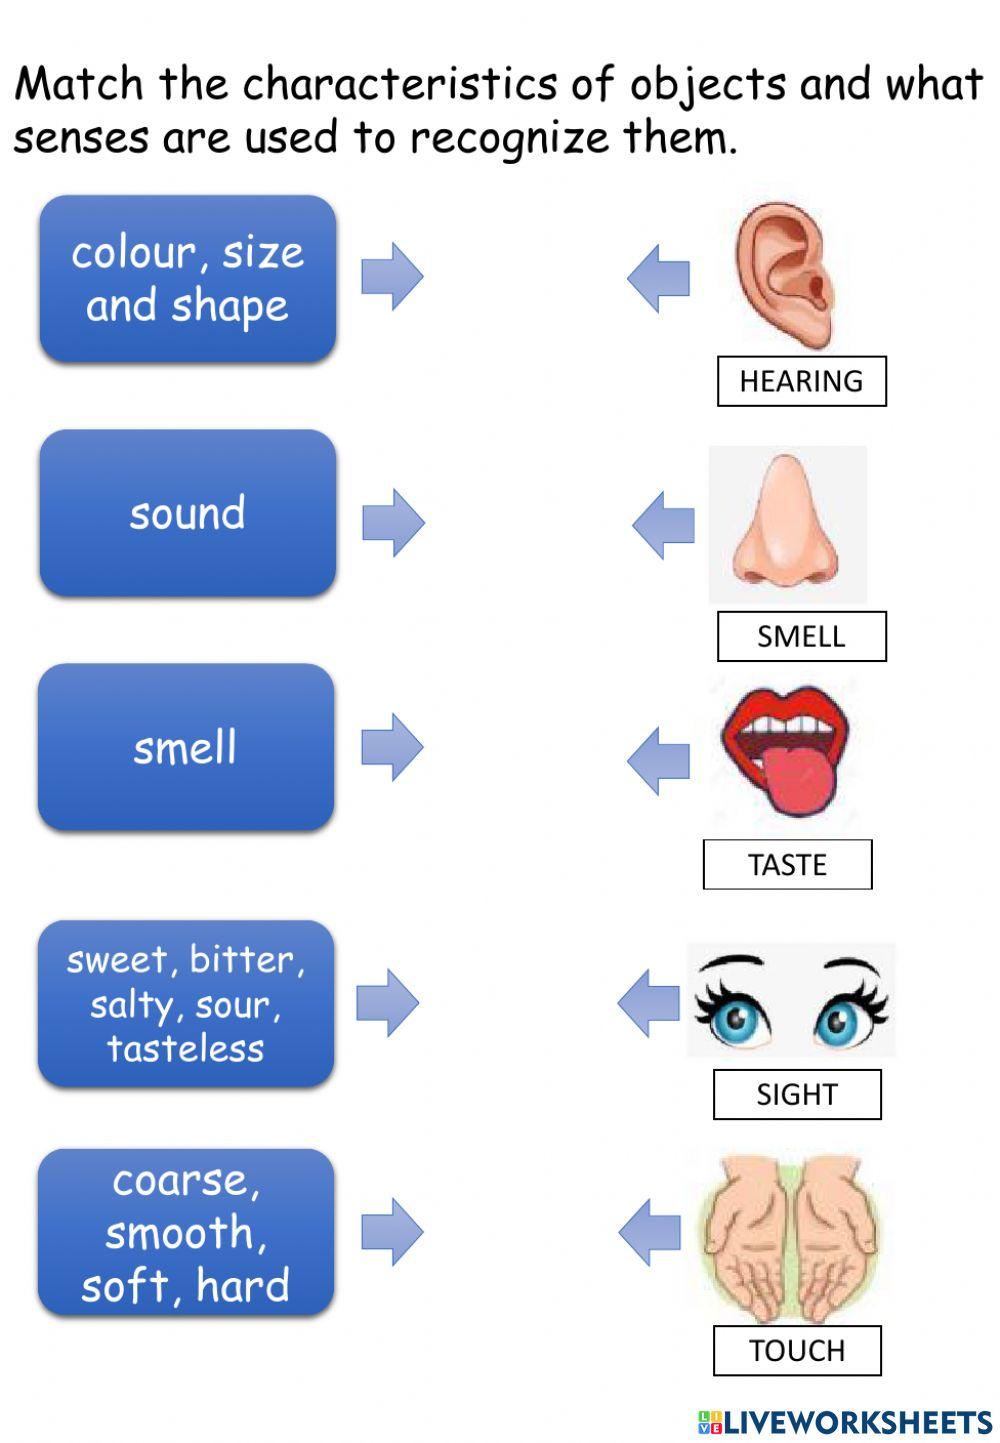 Characteristics of objects and what senses are used to recognize them